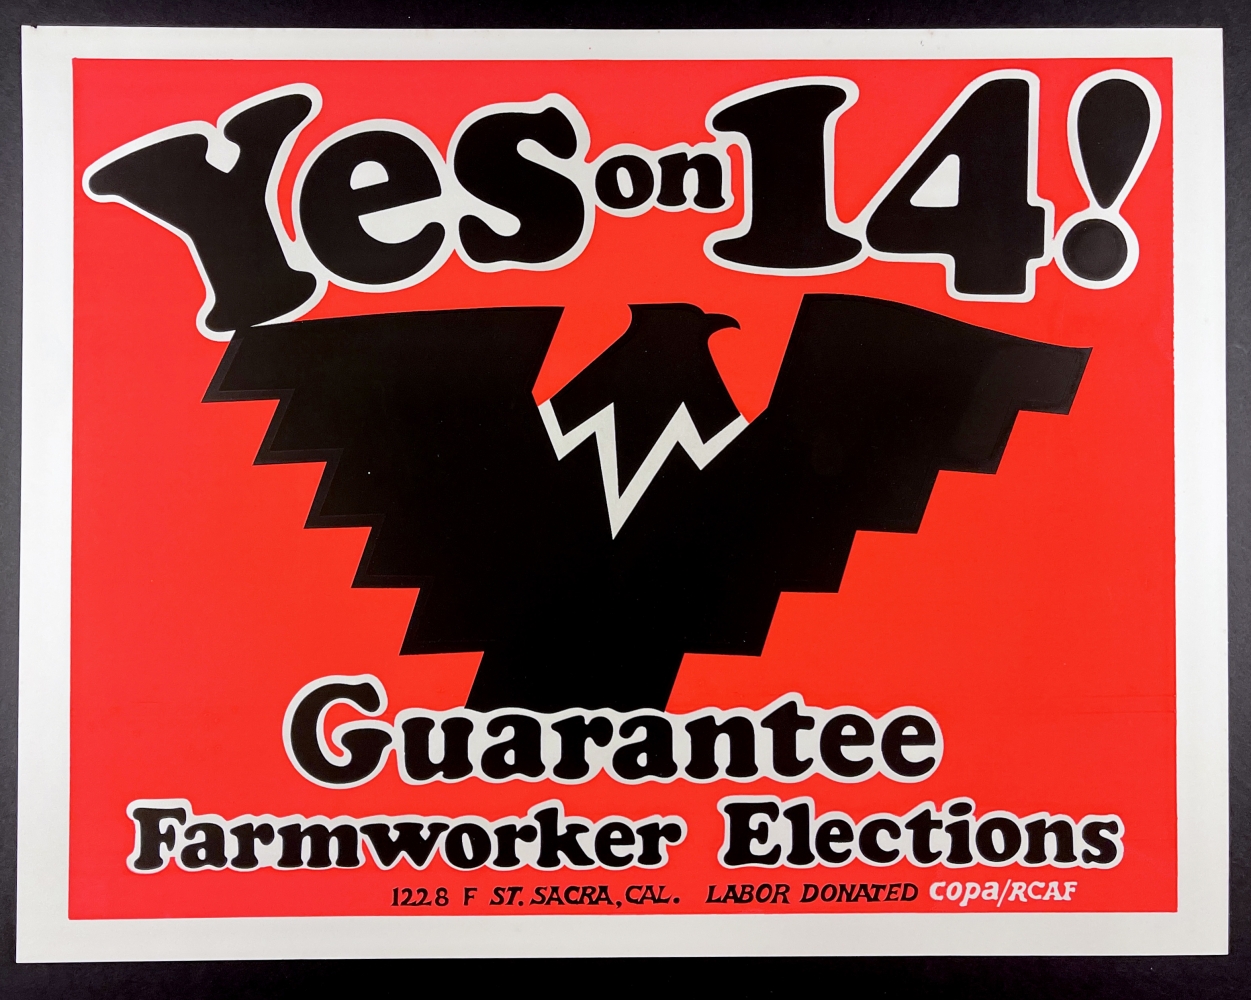 Yes on 14! Guarantee Farmworker Elections
[MEXICO - MEXICAN AMERICANS] RCAF Colectiva,&amp;nbsp;N.d. [1976]

Illustrated poster, printed in green, brown and red on commercial stock.
Approx.18&amp;quot; x 24&amp;quot;
Edition size: Unknown
$1200

Condition and provenance notes: Near fine produced for Cesar Chavez and the United Farm Workers campaign to pass Proposition 14 in California, an historic work of legislation guaranteeing migrant farm workers the right to vote on labor contracts.

Published by COPA/RCAF,&amp;nbsp;Sacramento, Calif.

INQUIRE